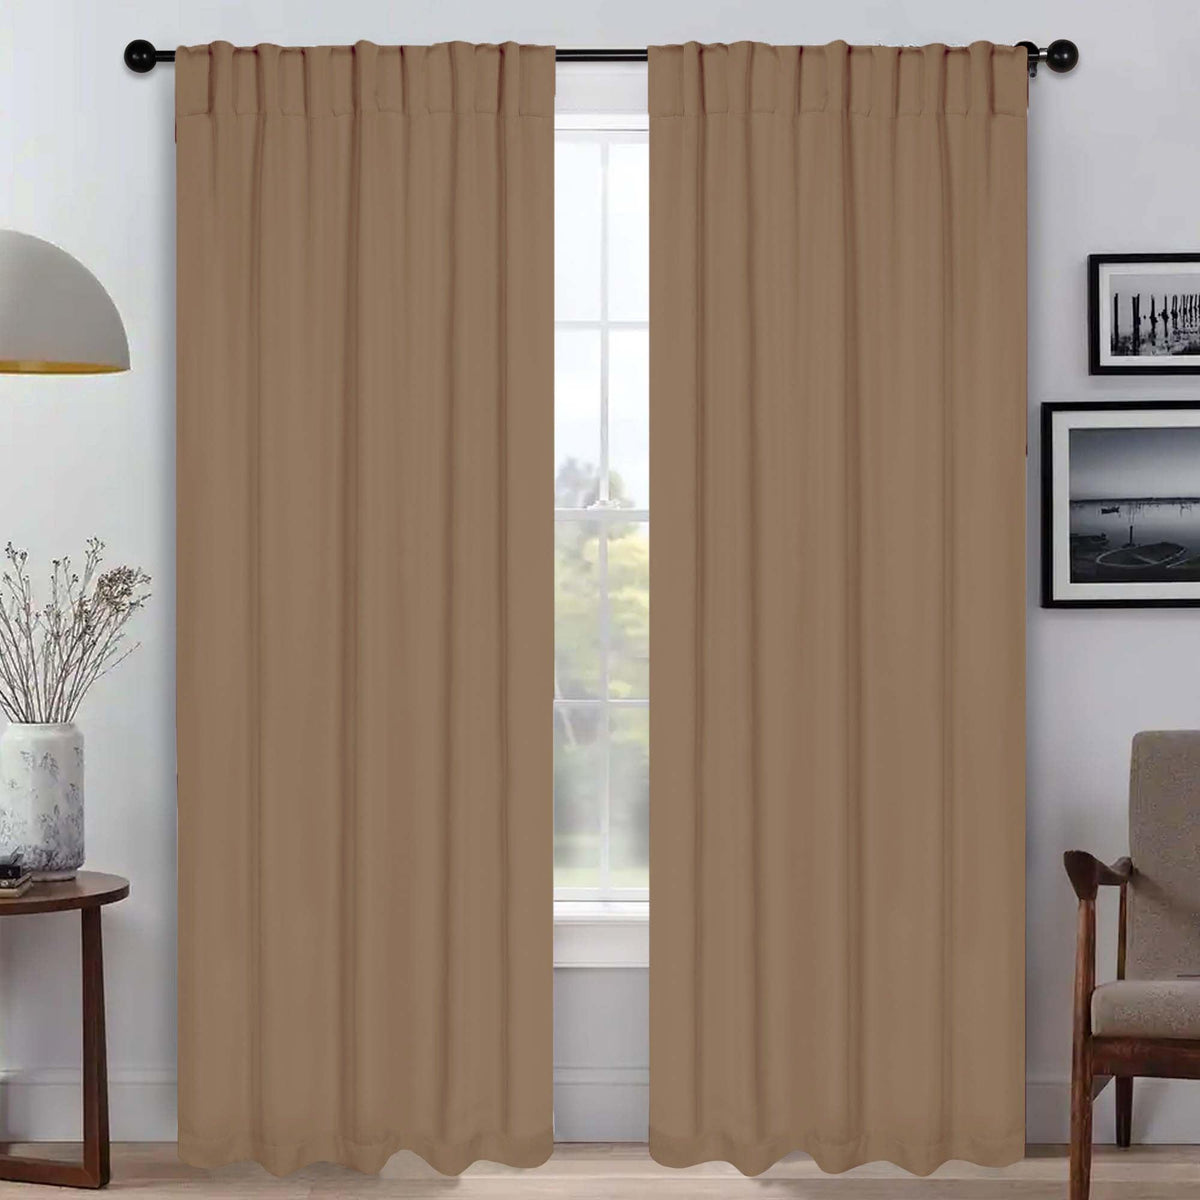 Solid Room Darkening Blackout Curtain Panels, Back Tabs, Set of 2 - Blackout Curtains by Superior - Superior 